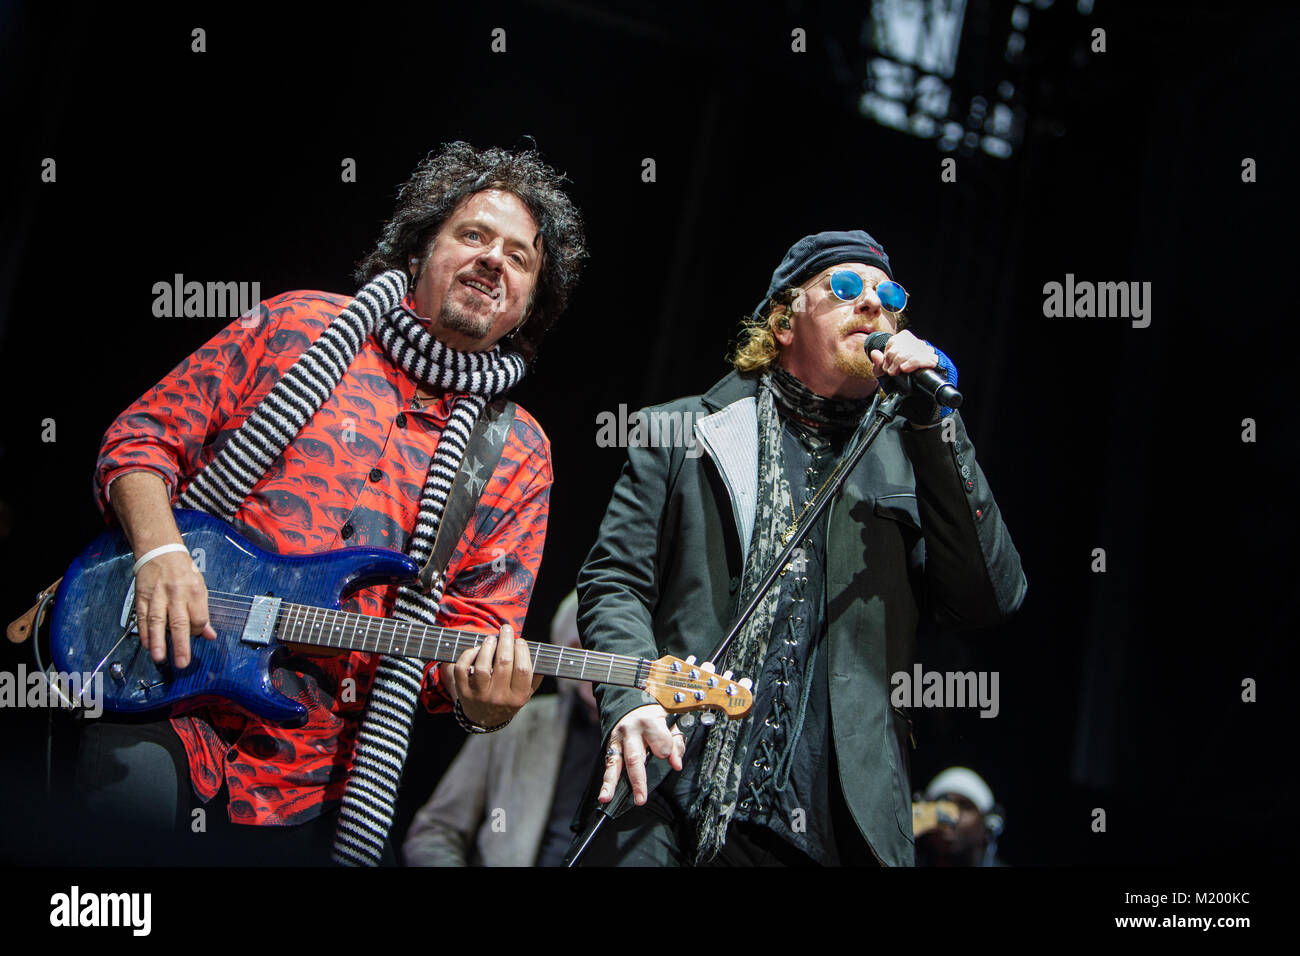 Toto Rock Band High Resolution Stock Photography and Images - Alamy